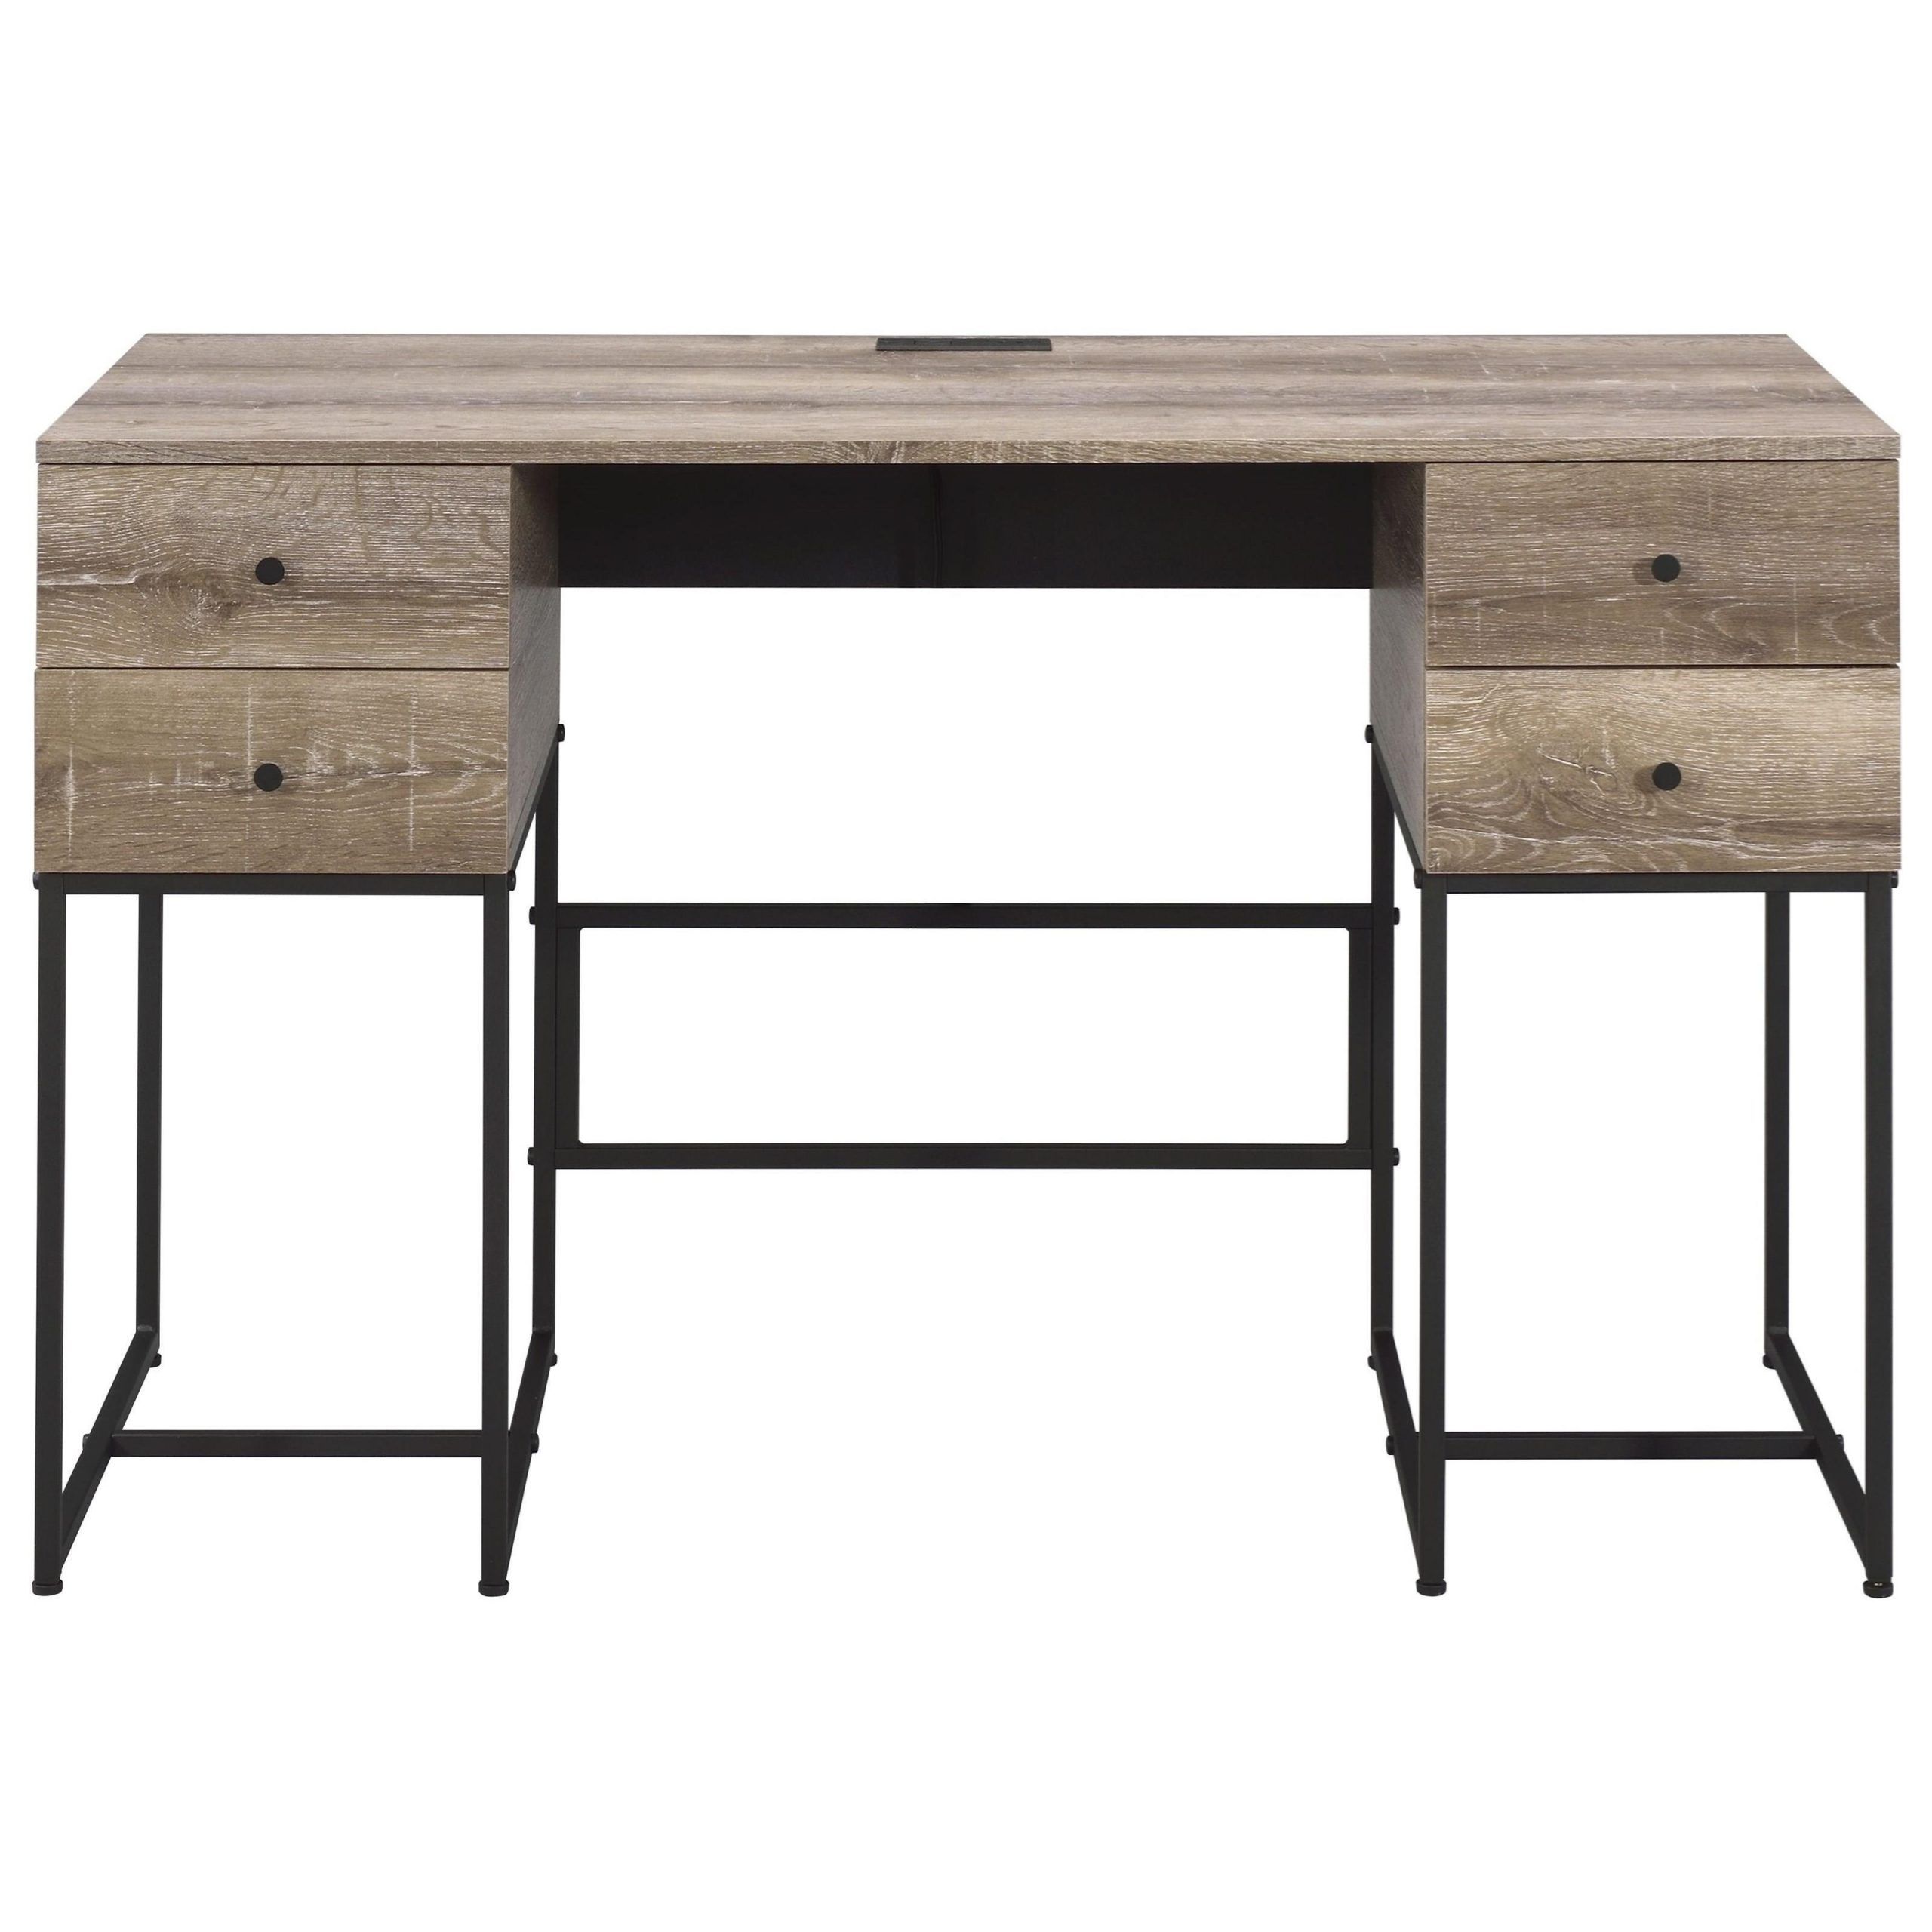 Acme Furniture Desirre Rustic Industrial 4 Drawer Desk With Usb Ports Within Acacia Wood Writing Desks With Usb Ports (View 10 of 15)